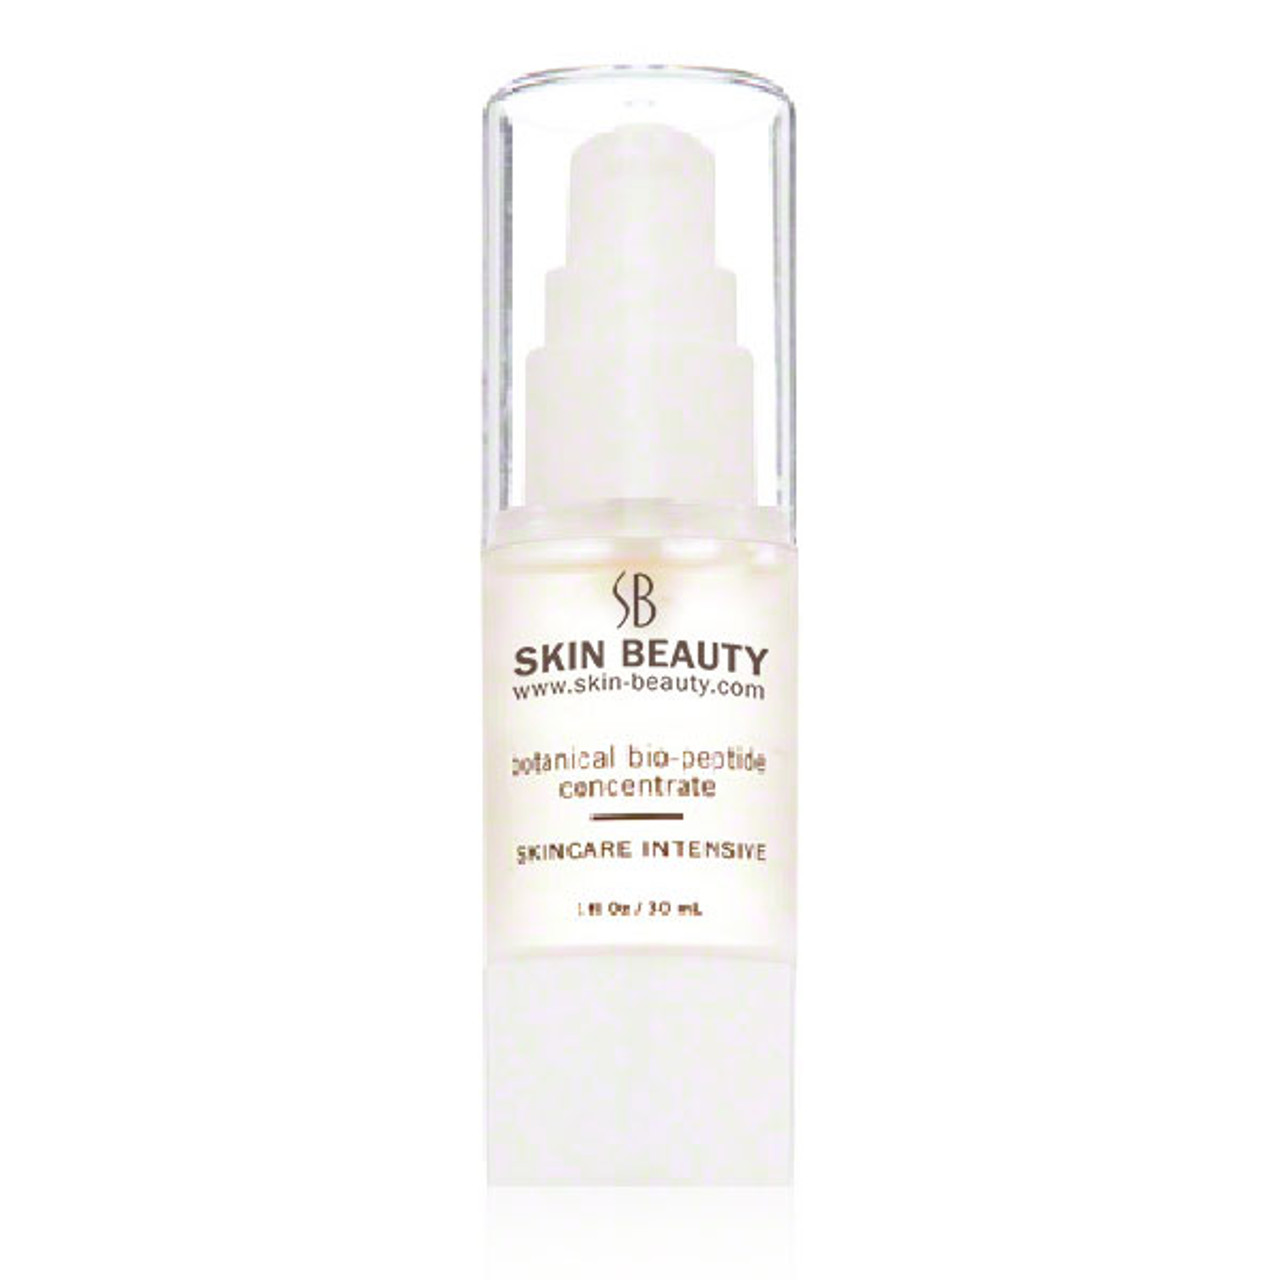 Skin Beauty Botanical Bio-Peptide Concentrate | Anti Wrinkle